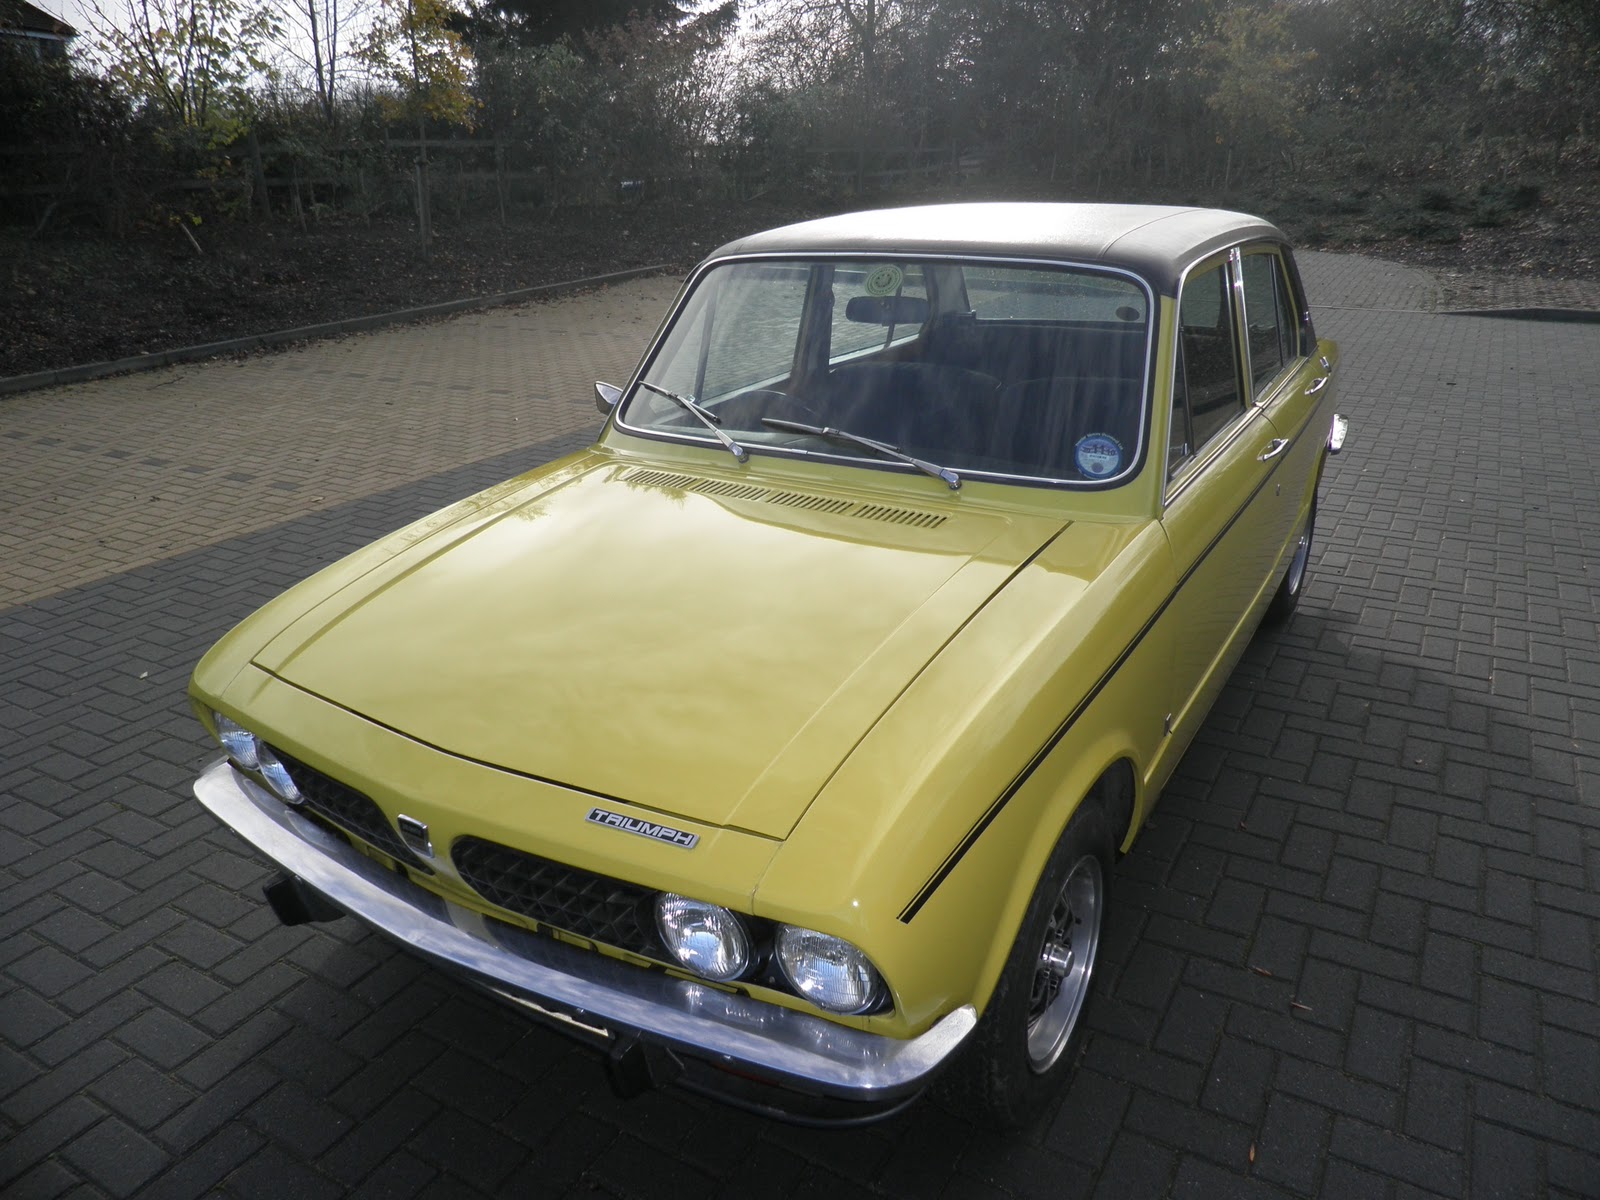 Retro-Spective - The best of classic cars for sale!: Triumph ...